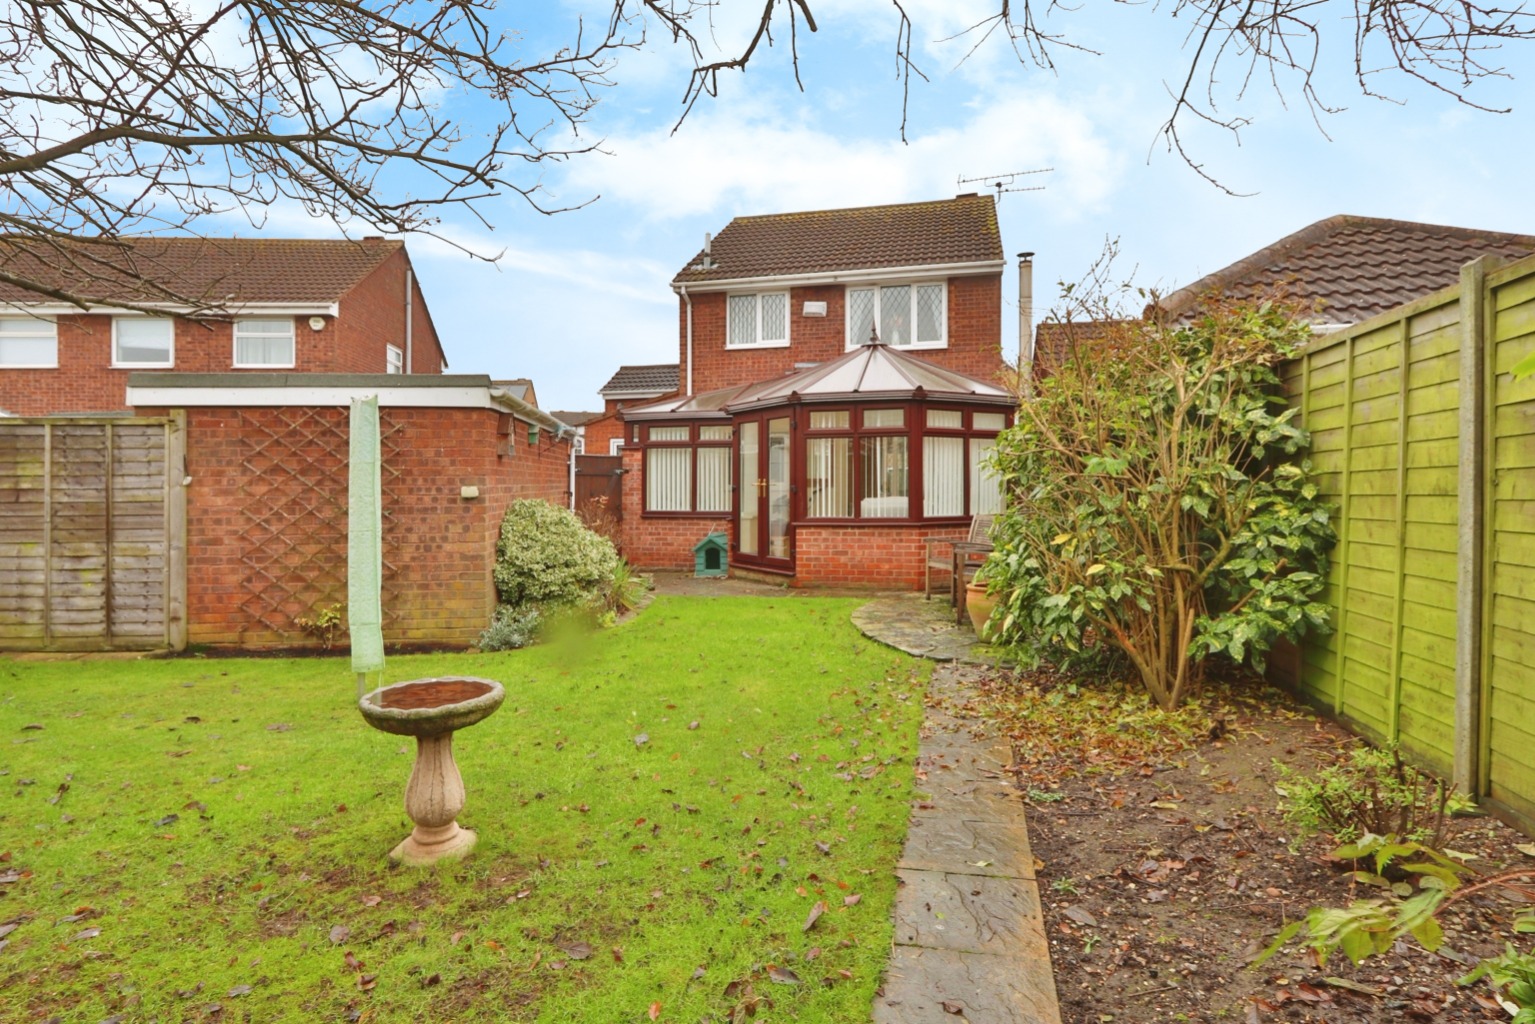 4 bed detached house for sale in Greville Road, Hull  - Property Image 2